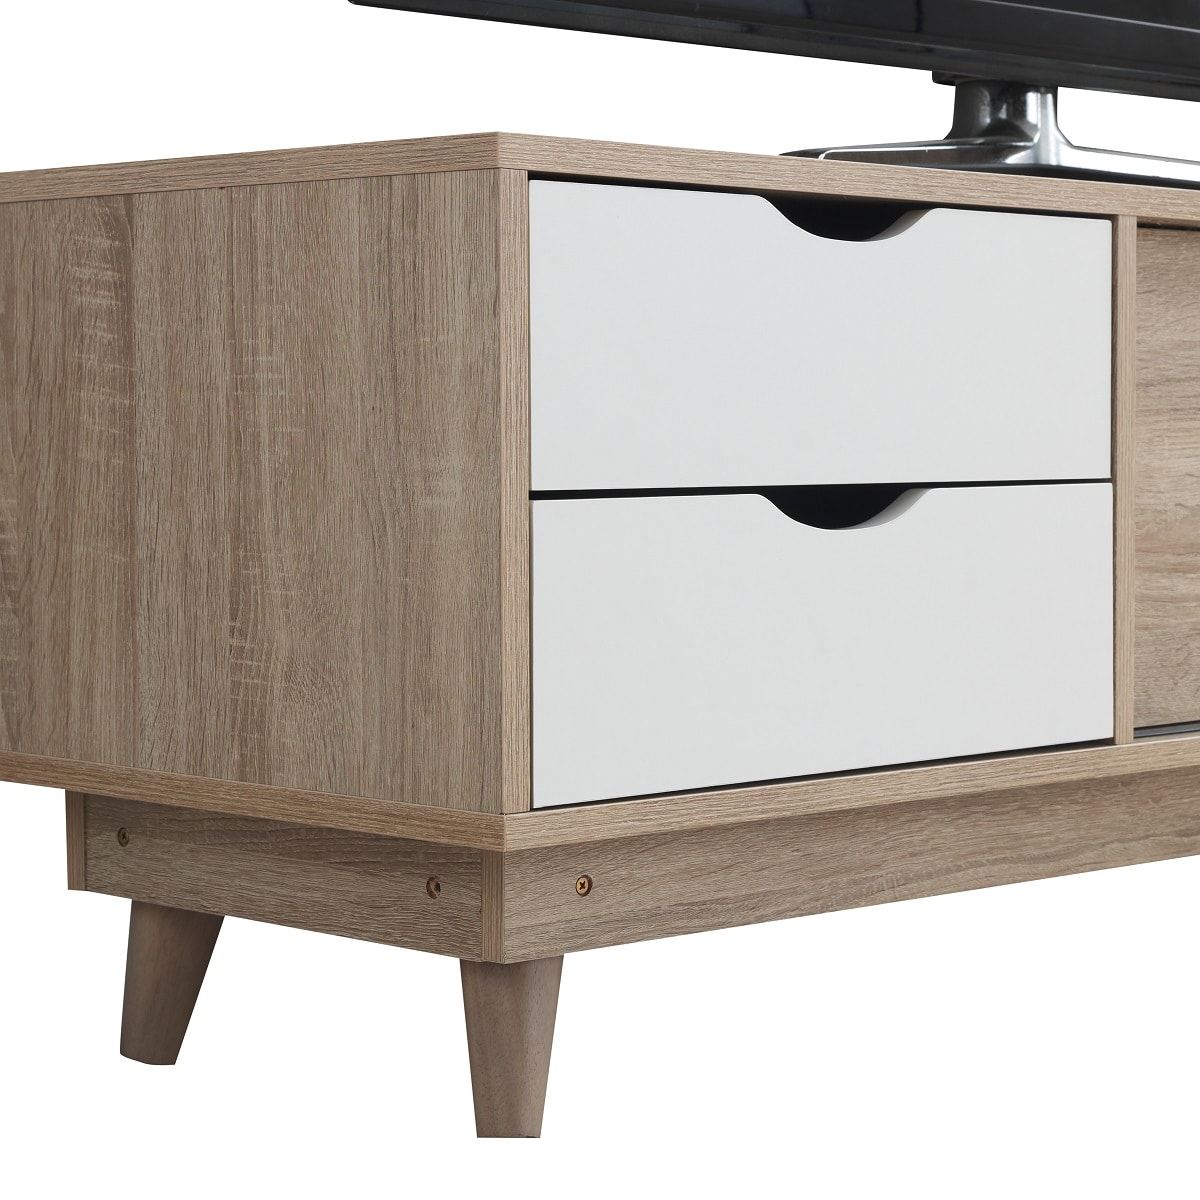 Alford Scandinavian Tv Unit Sonoma Oak & White – Y1 Furniture In Emmett Sonoma Tv Stands With Coffee Table With Metal Frame (View 5 of 15)